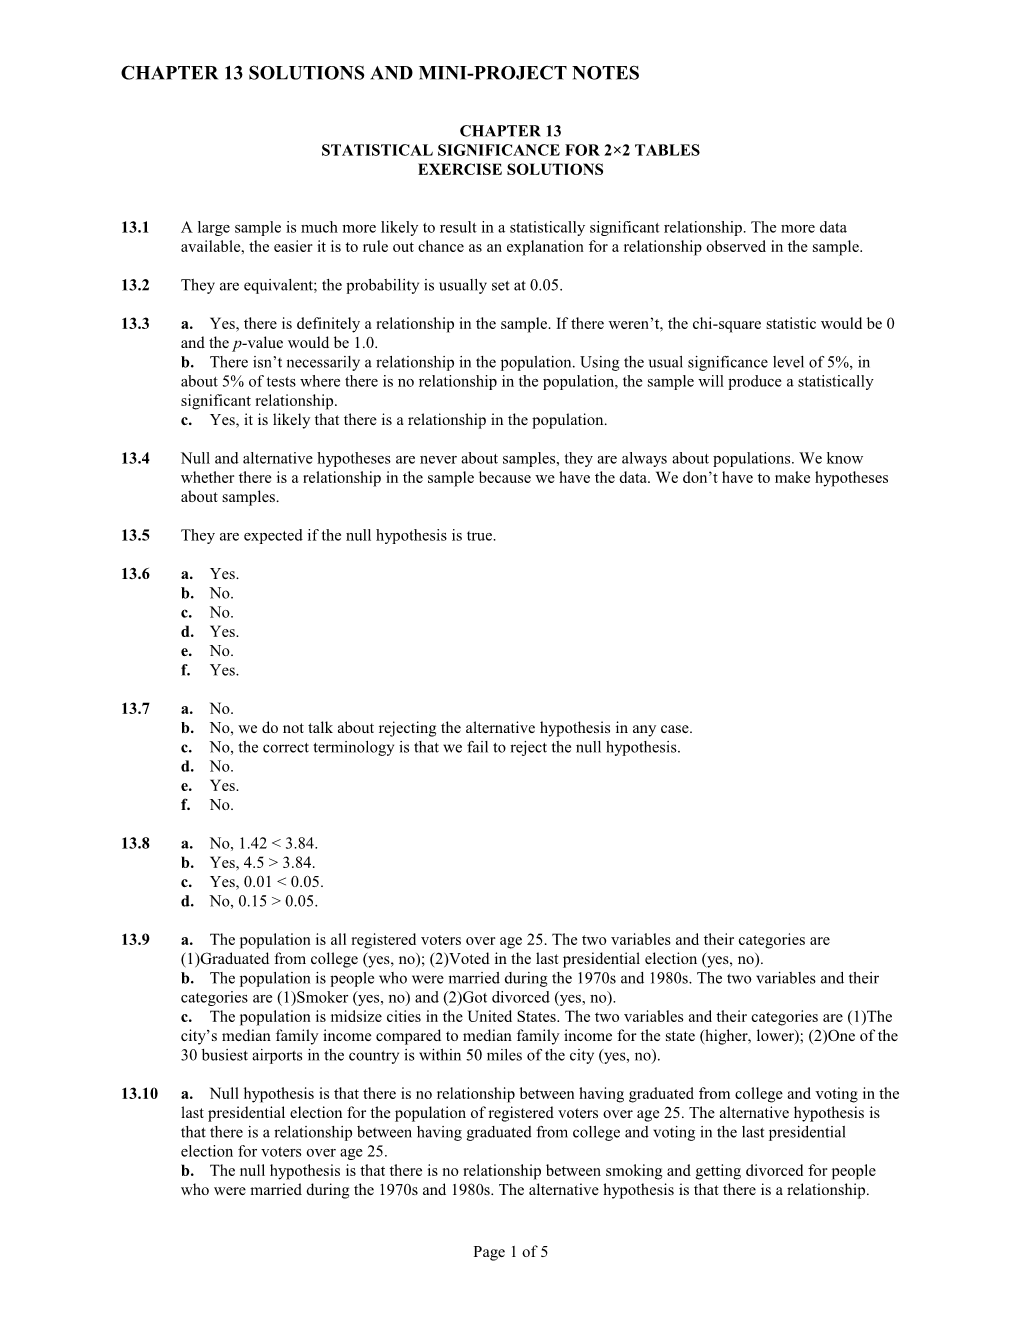 Chapter 13Solutions and Mini-Project Notes